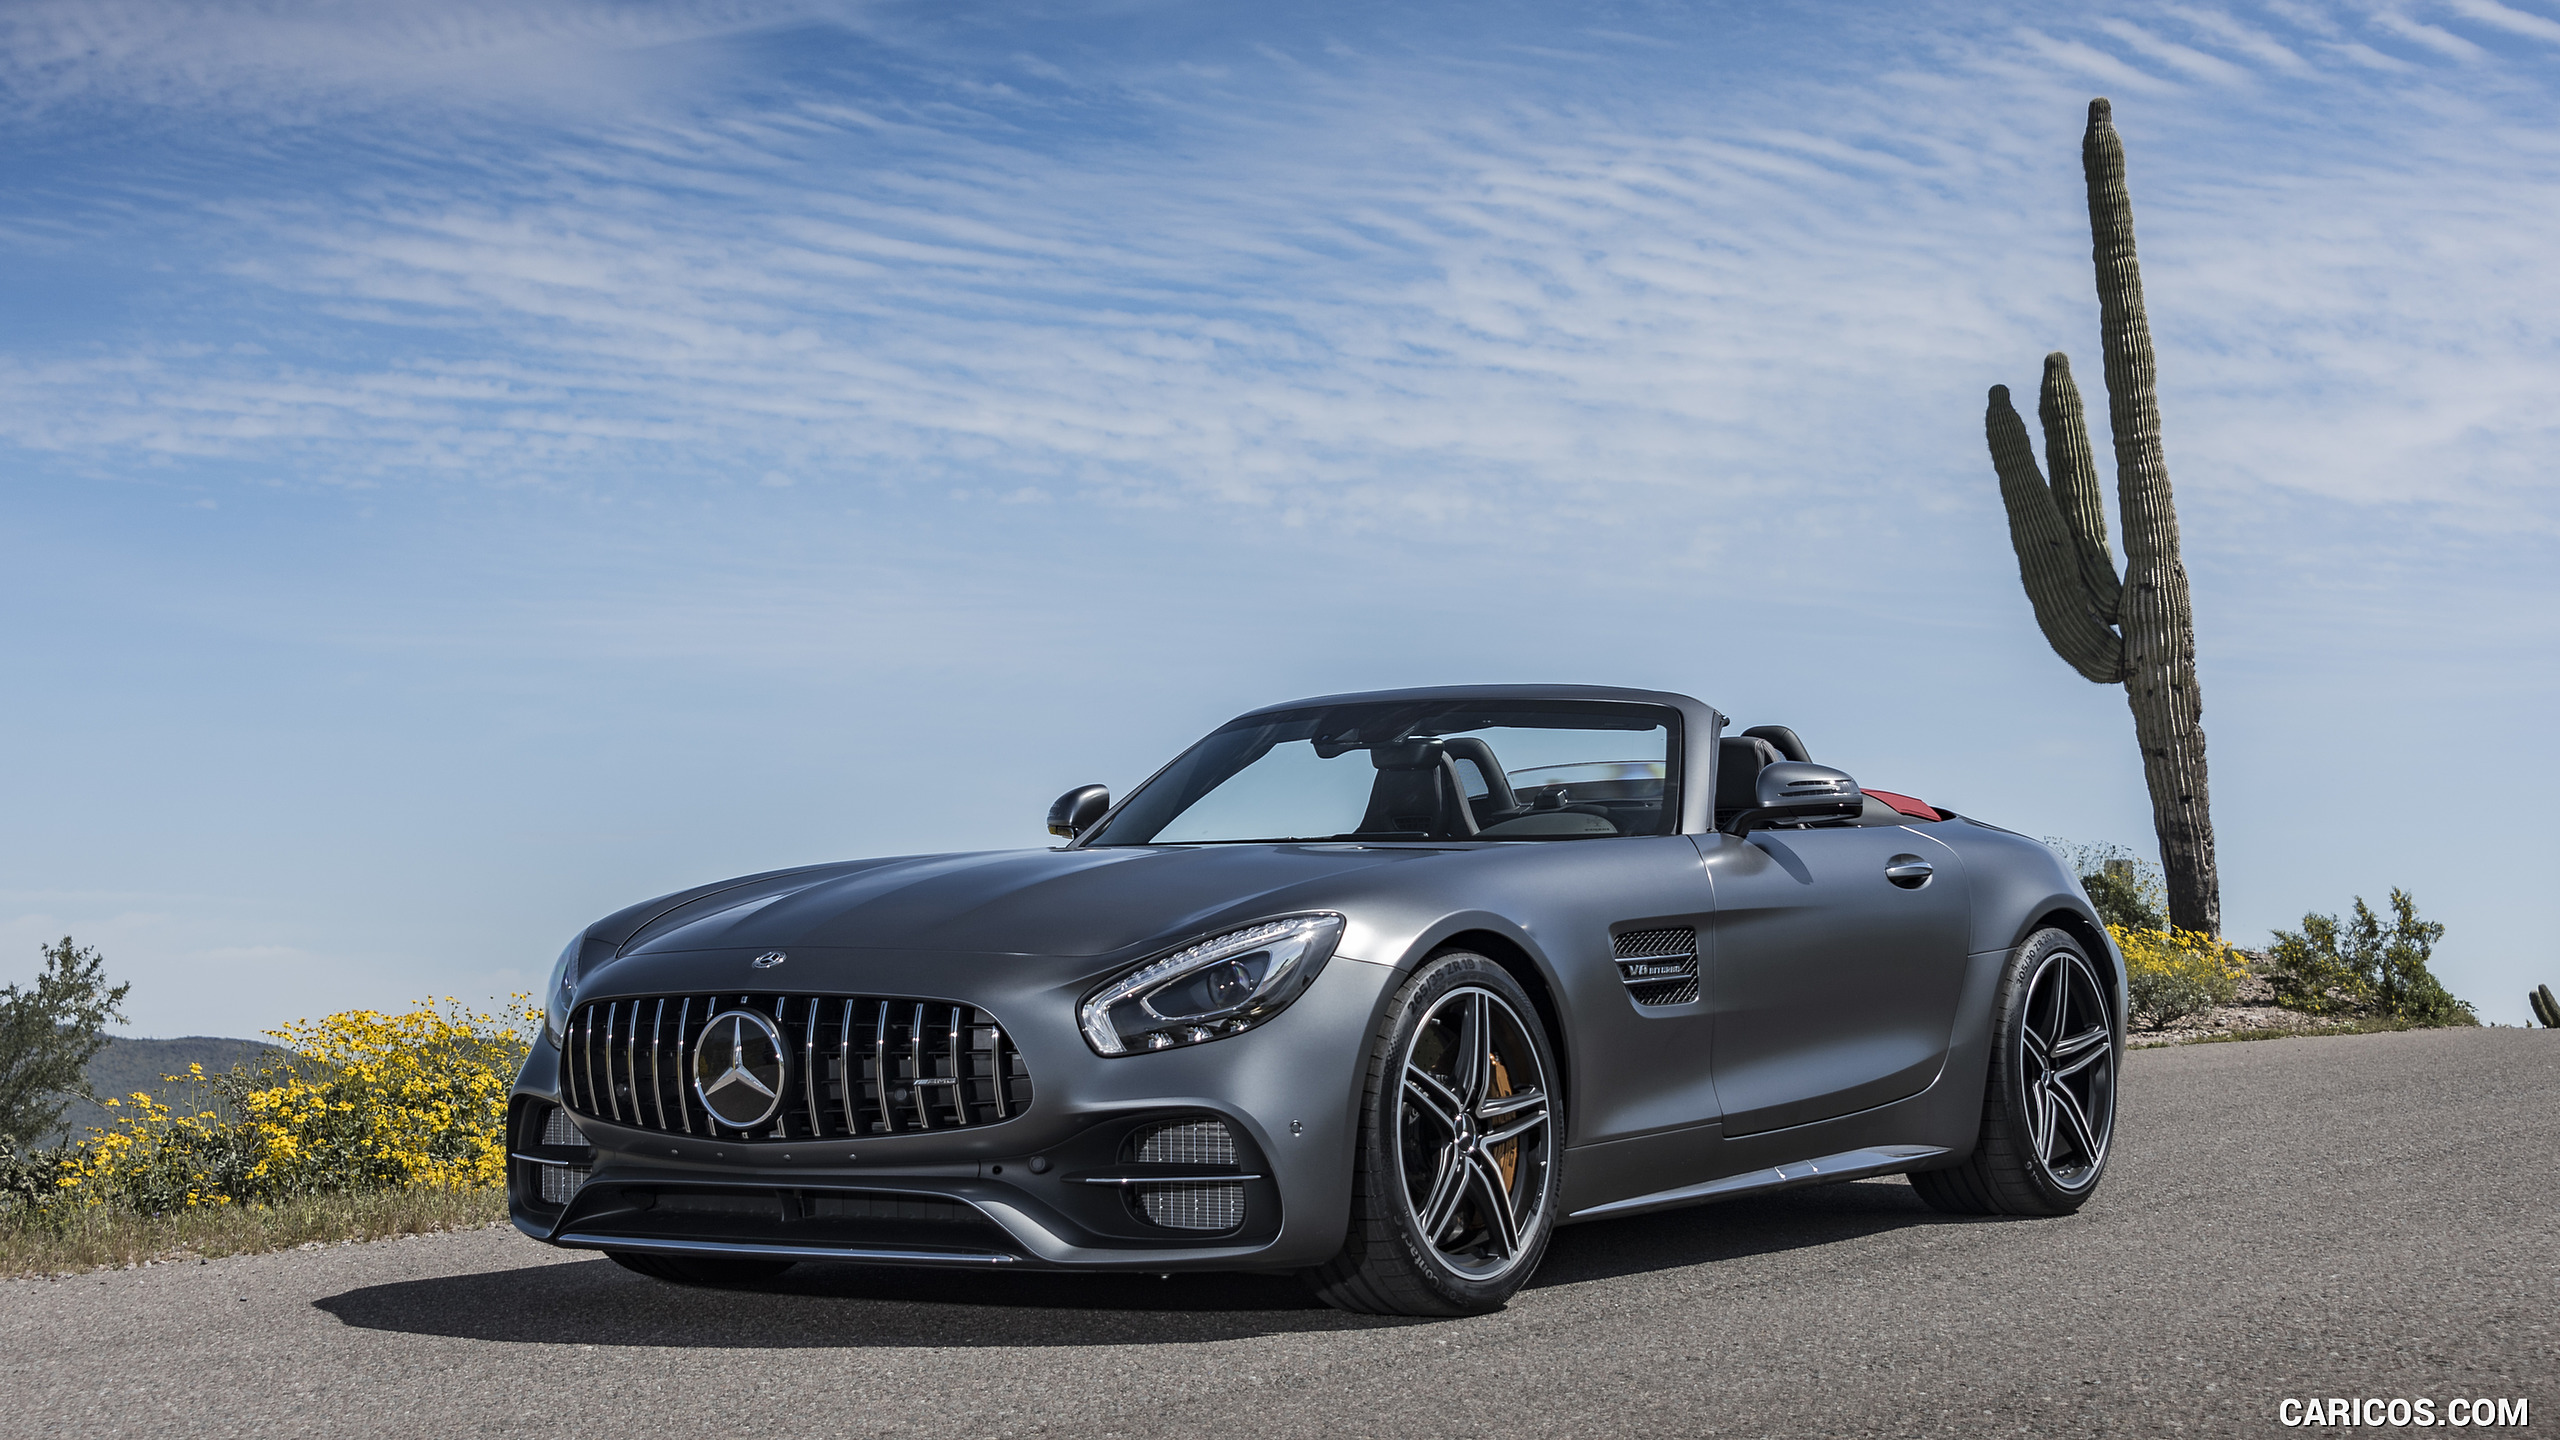 2018 Mercedes-AMG GT C Roadster - Front Three-Quarter, #320 of 350